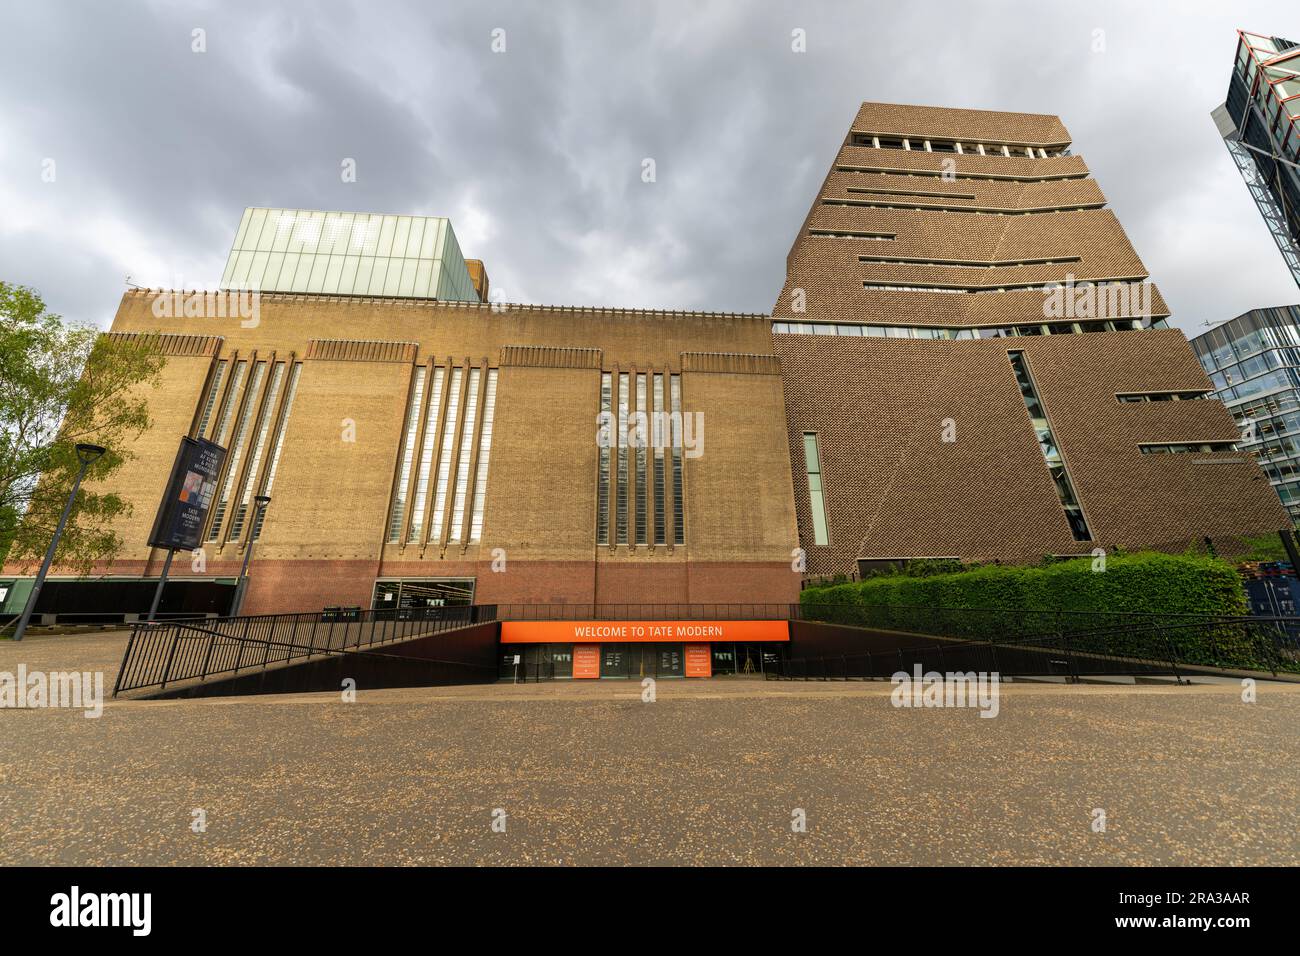 Tate Modern entrance, a modern, contemporary art museum in London, on the Thames river. Modern architecture interior and exterior. A top attraction. Stock Photo